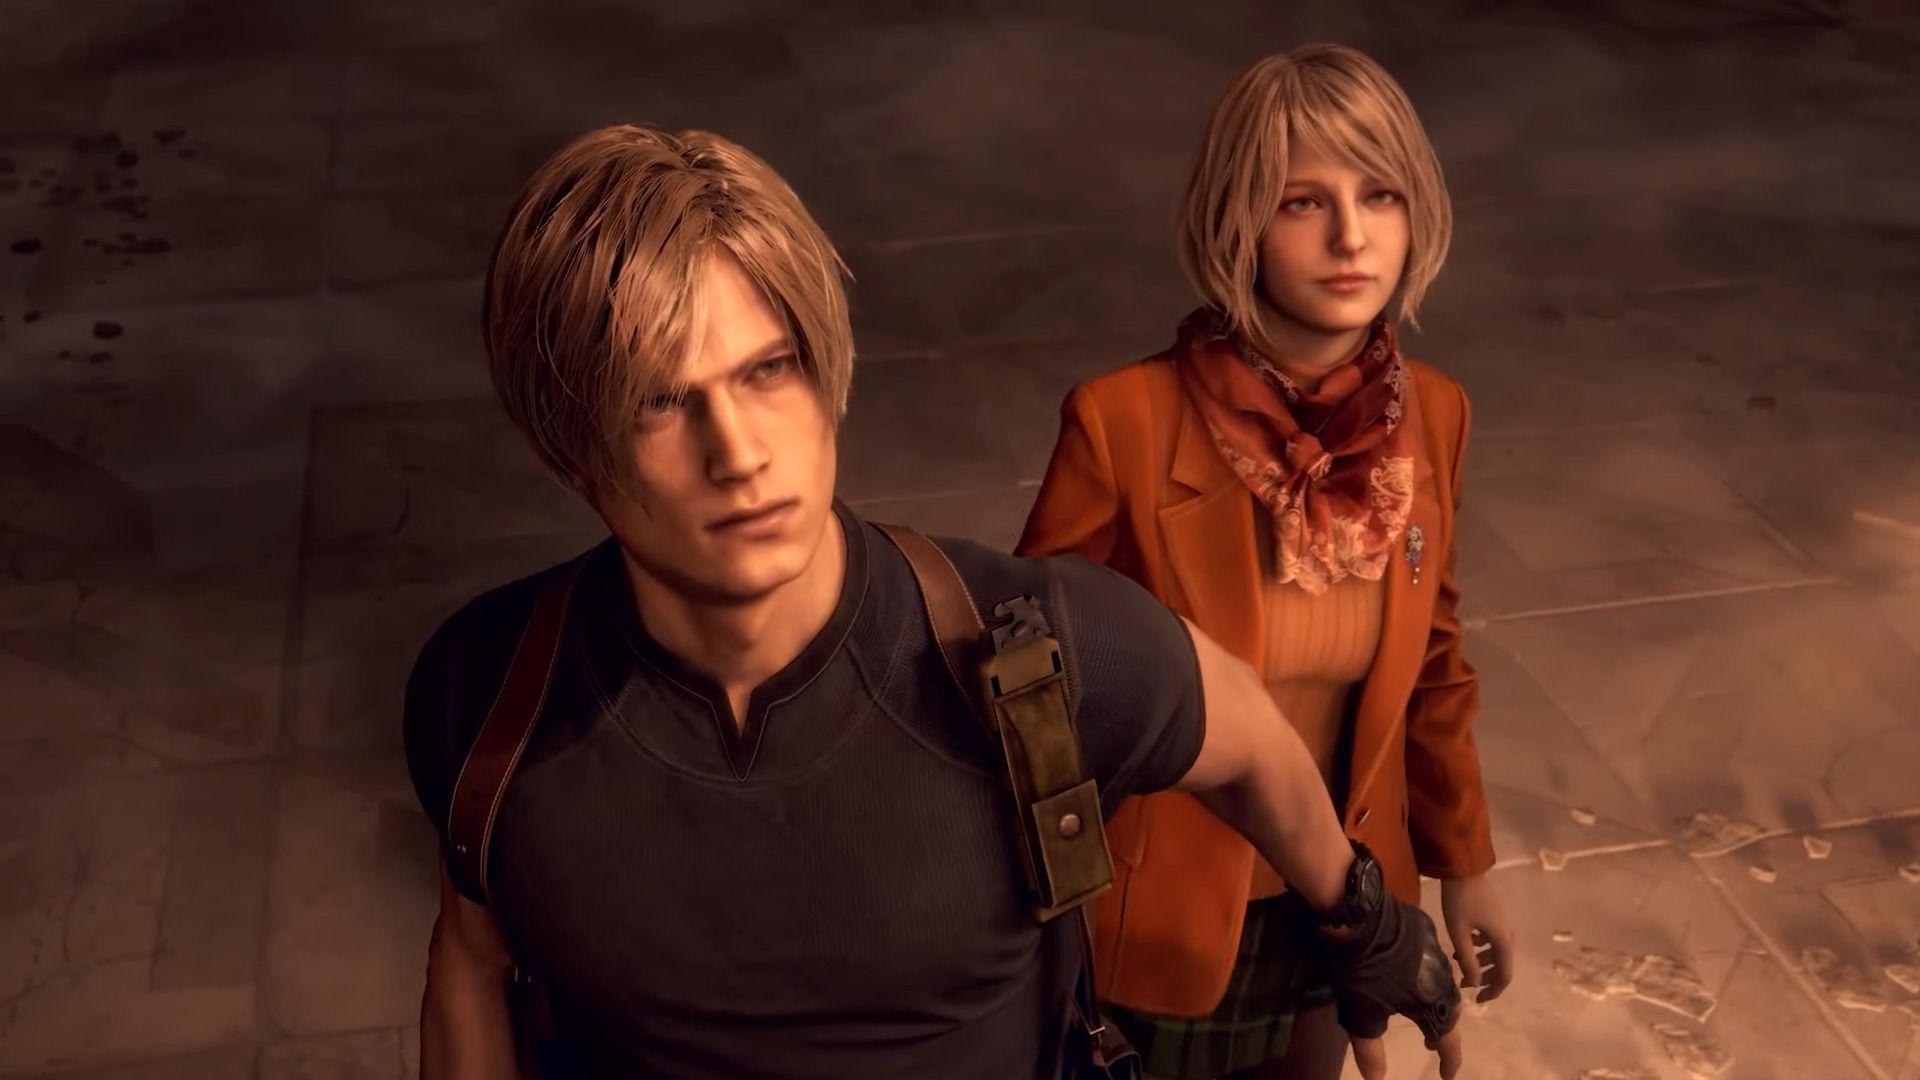 This Week's Japanese Game Releases: Resident Evil 4 remake, Atelier Ryza 3:  Alchemist of the End & the Secret Key, more - Gematsu